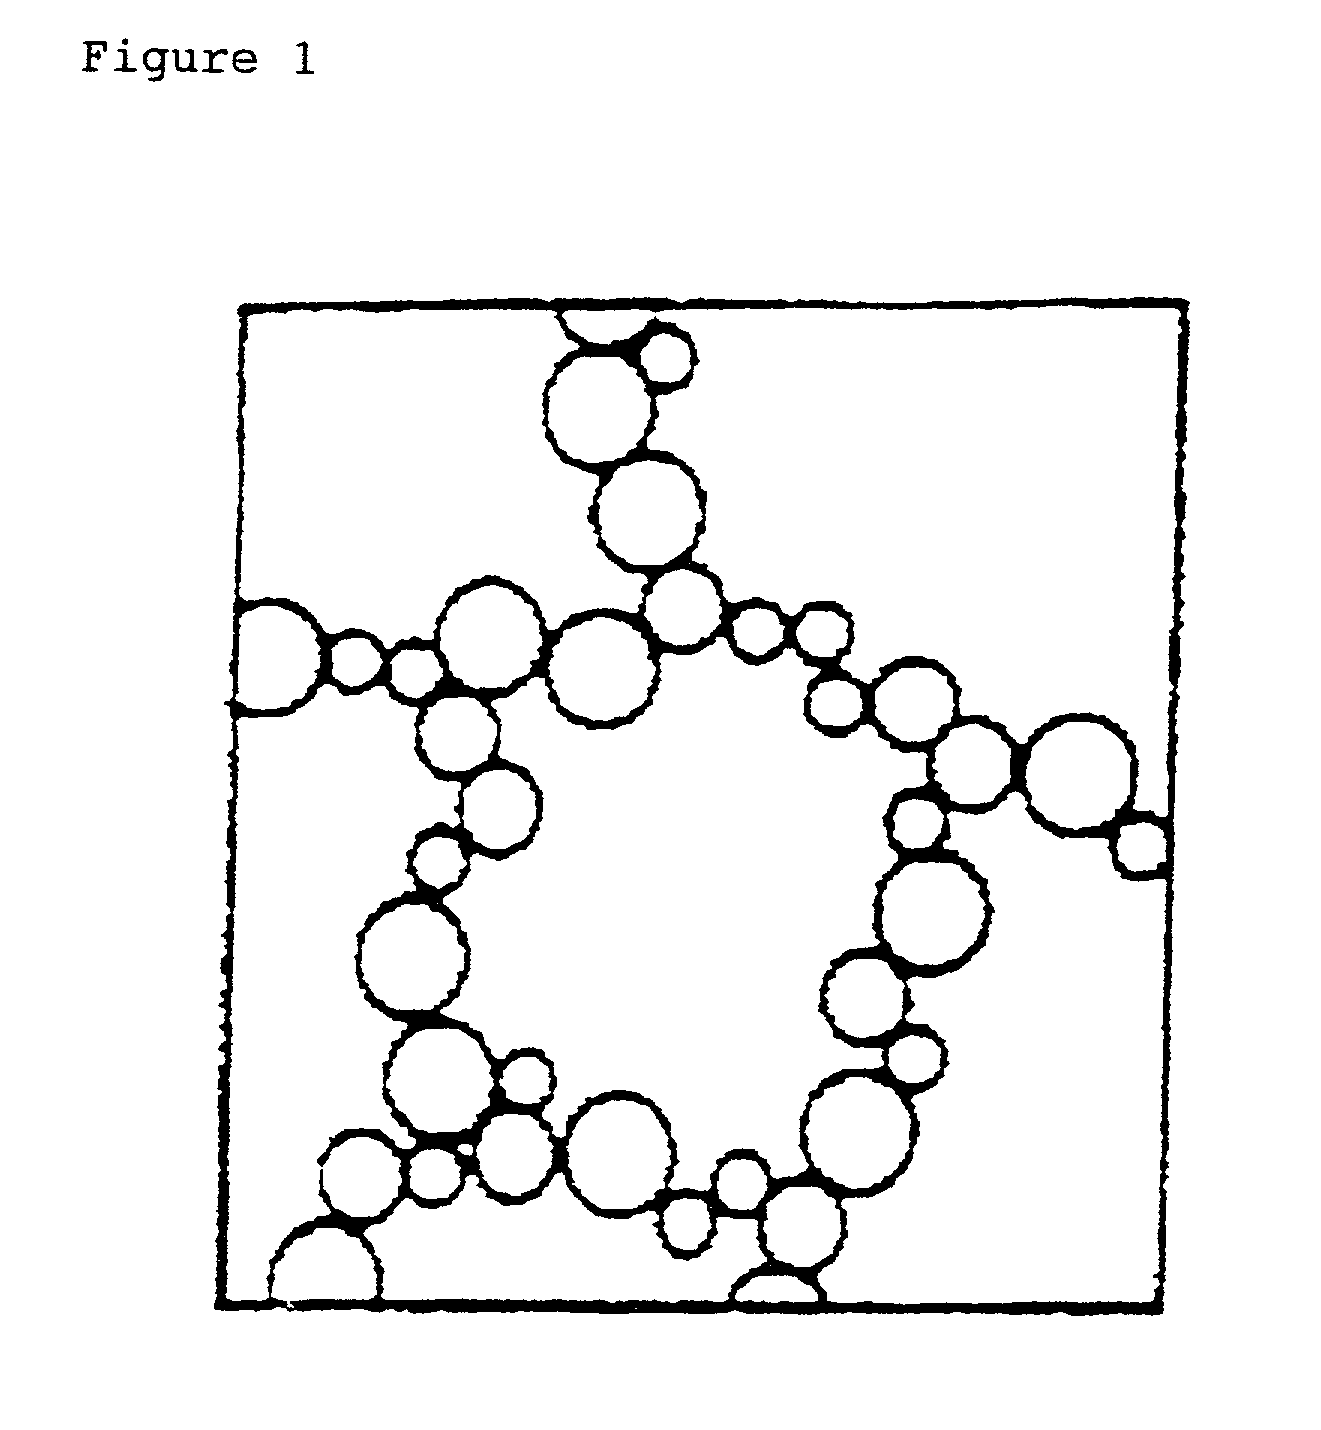 Lipid particles on the basis of mixtures of liquid and solid lipids and method for producing same